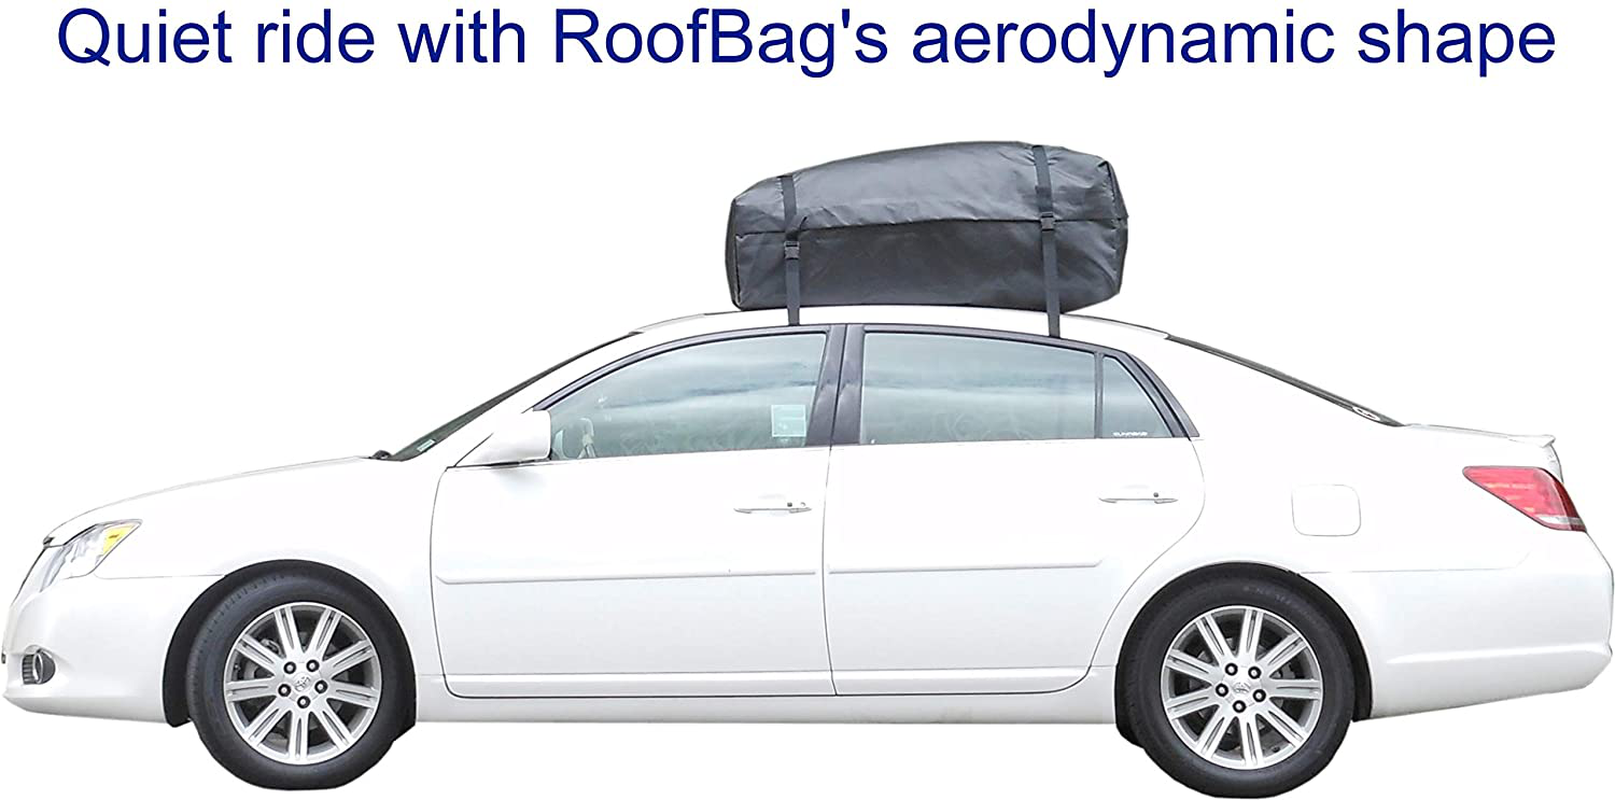 RoofBag Rooftop Cargo Carrier Waterproof Car Top Carrier for Cars with Racks or Without Racks Includes 2 Straps, Roof Protective Mat, Storage Bag